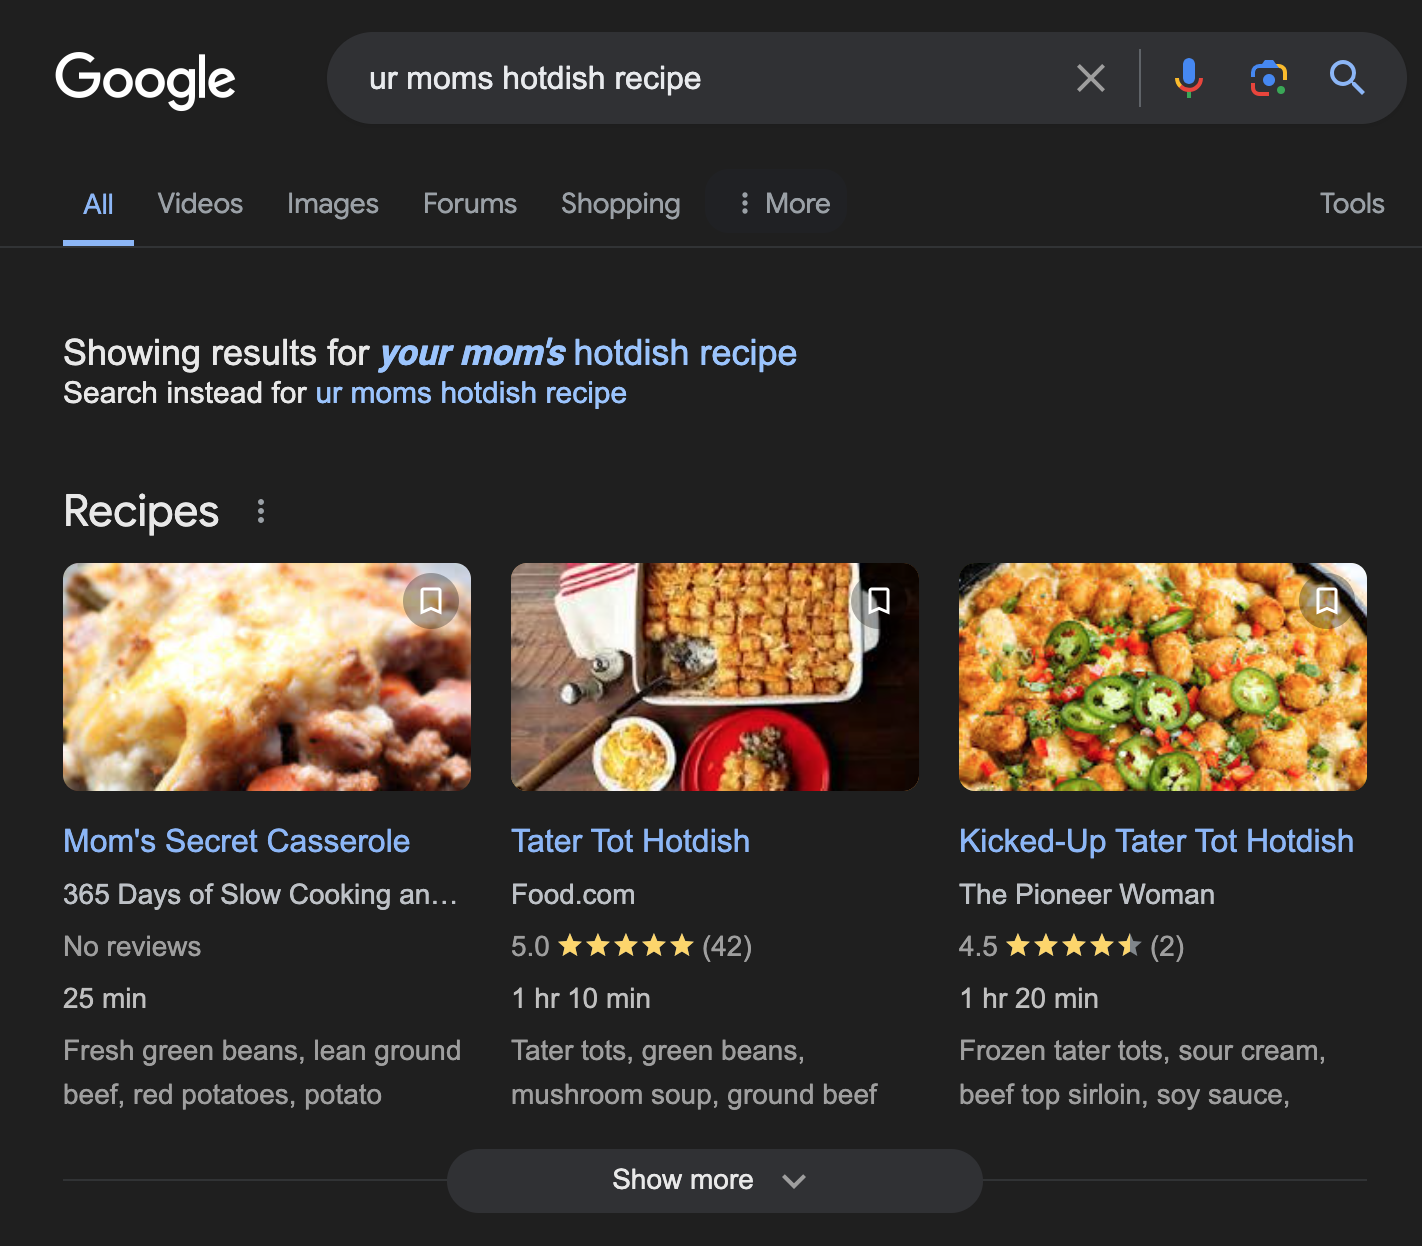 search results for your mom's hotdish recipe